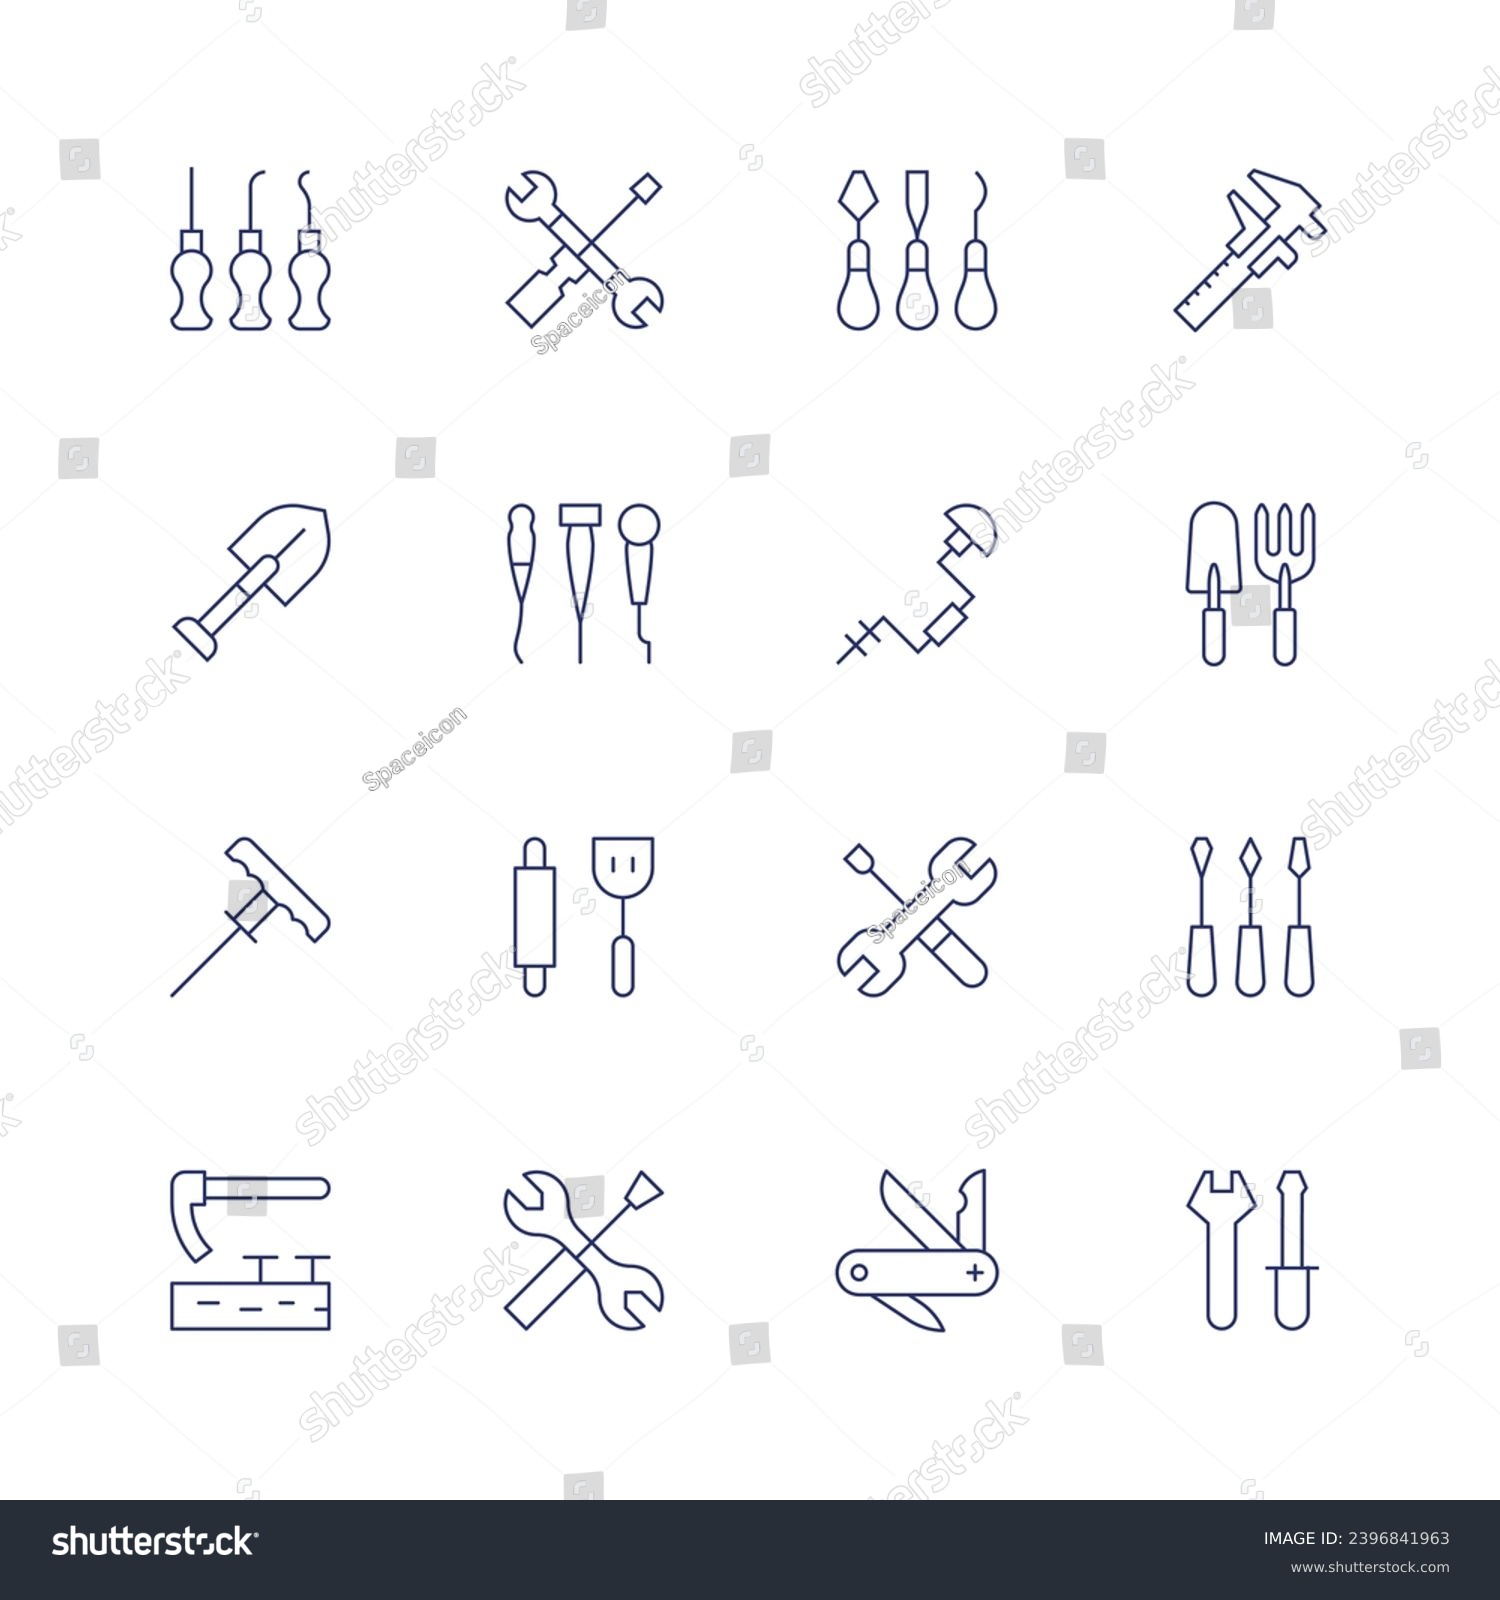 SVG of Tools icon set. Thin line icon. Editable stroke. Containing awl, shovel, plugger, adze, tool, tools, kitchen tools, sculpture, hand drill, swiss army knife, micrometer, farming, wrench, screwdriver. svg